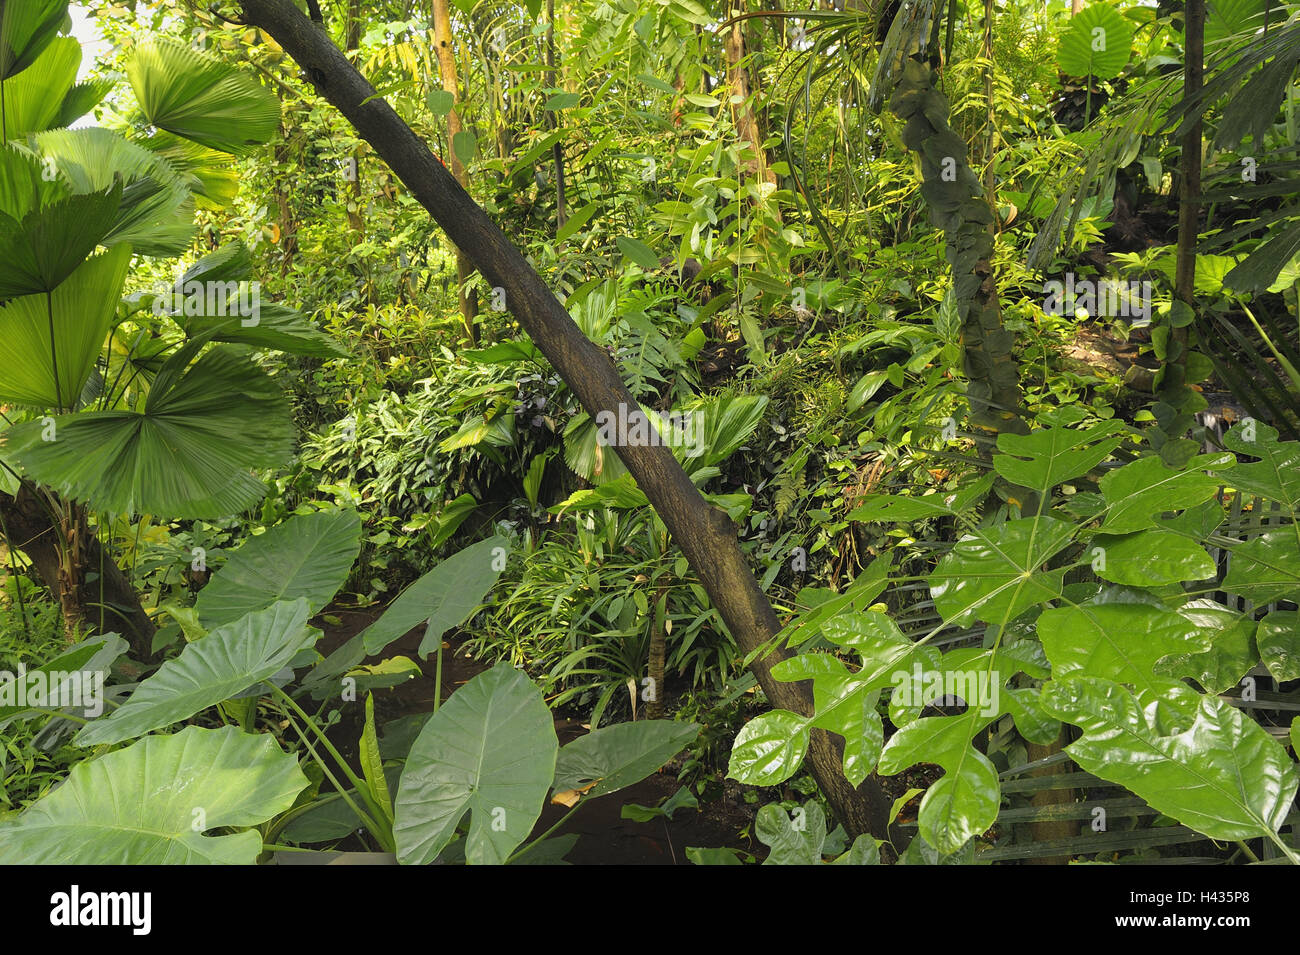 The Netherlands, home Arn, Burgers zoo, rainforest, Arnhem, zoo area, plant, primeval forest, vegetation, green, wood, jungle, biotope, plants, trees, leaves, shrubs, climate, tropical, excessively, close, damp, ecosystem, thicket, humidity, artificially, replica, nobody, nature, Stock Photo